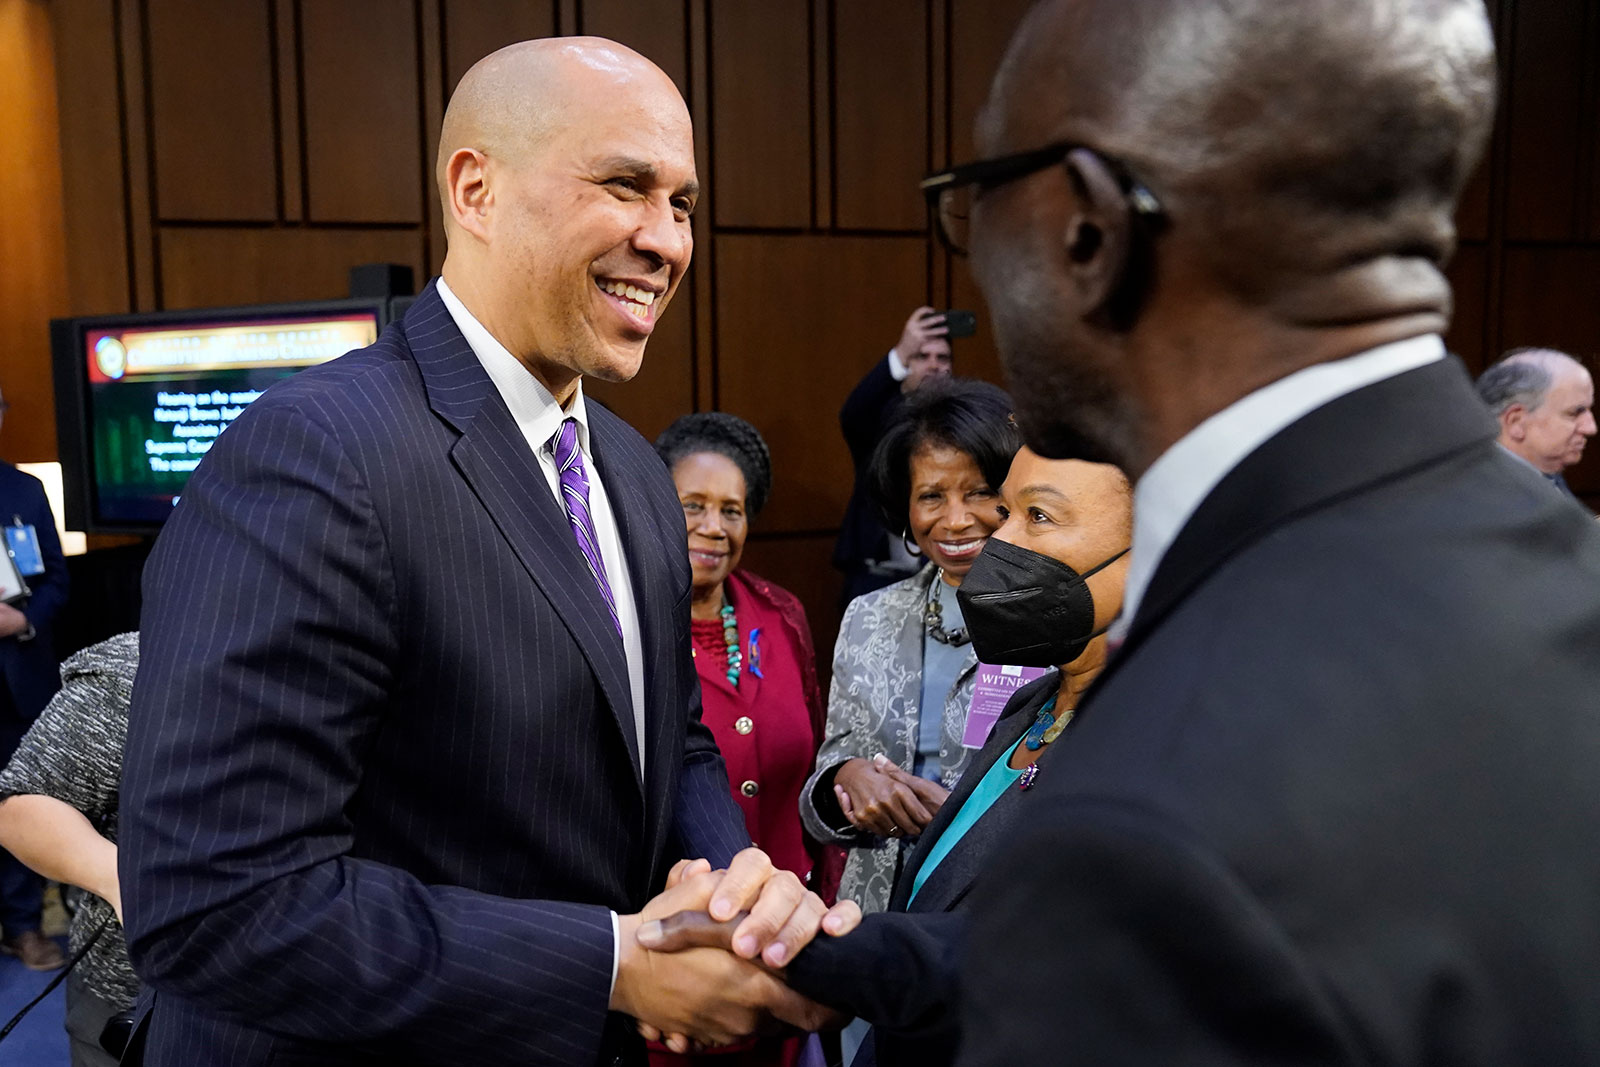 Sen. Cory Booker shakes hands with Johnny Brown, father of Supreme Court nominee Judge Ketanji Brown Jackson, during a break in her confirmation hearing Tuesday evening.